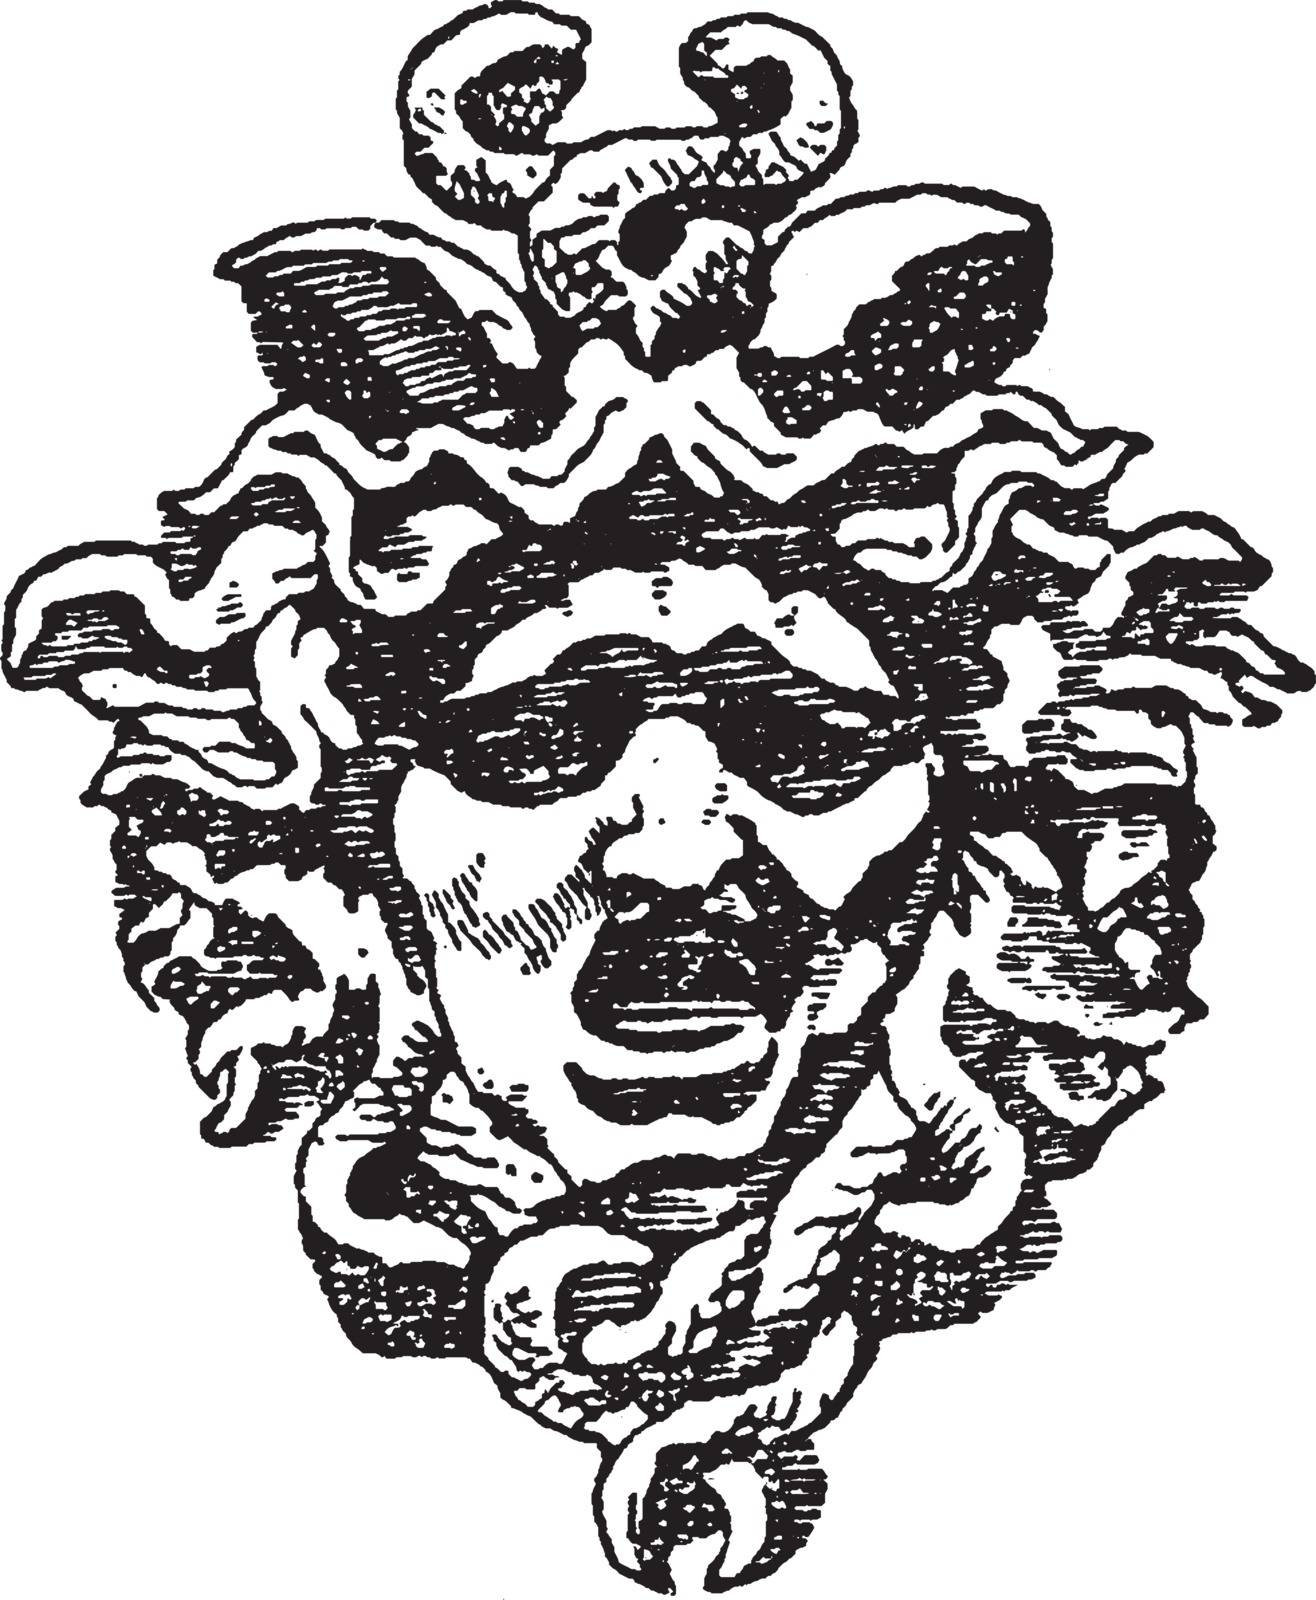 Tympanum Medusa Head is found in the arch of the entrance of the Royal Palace of Tuileries in Paris, vintage line drawing or engraving illustration.